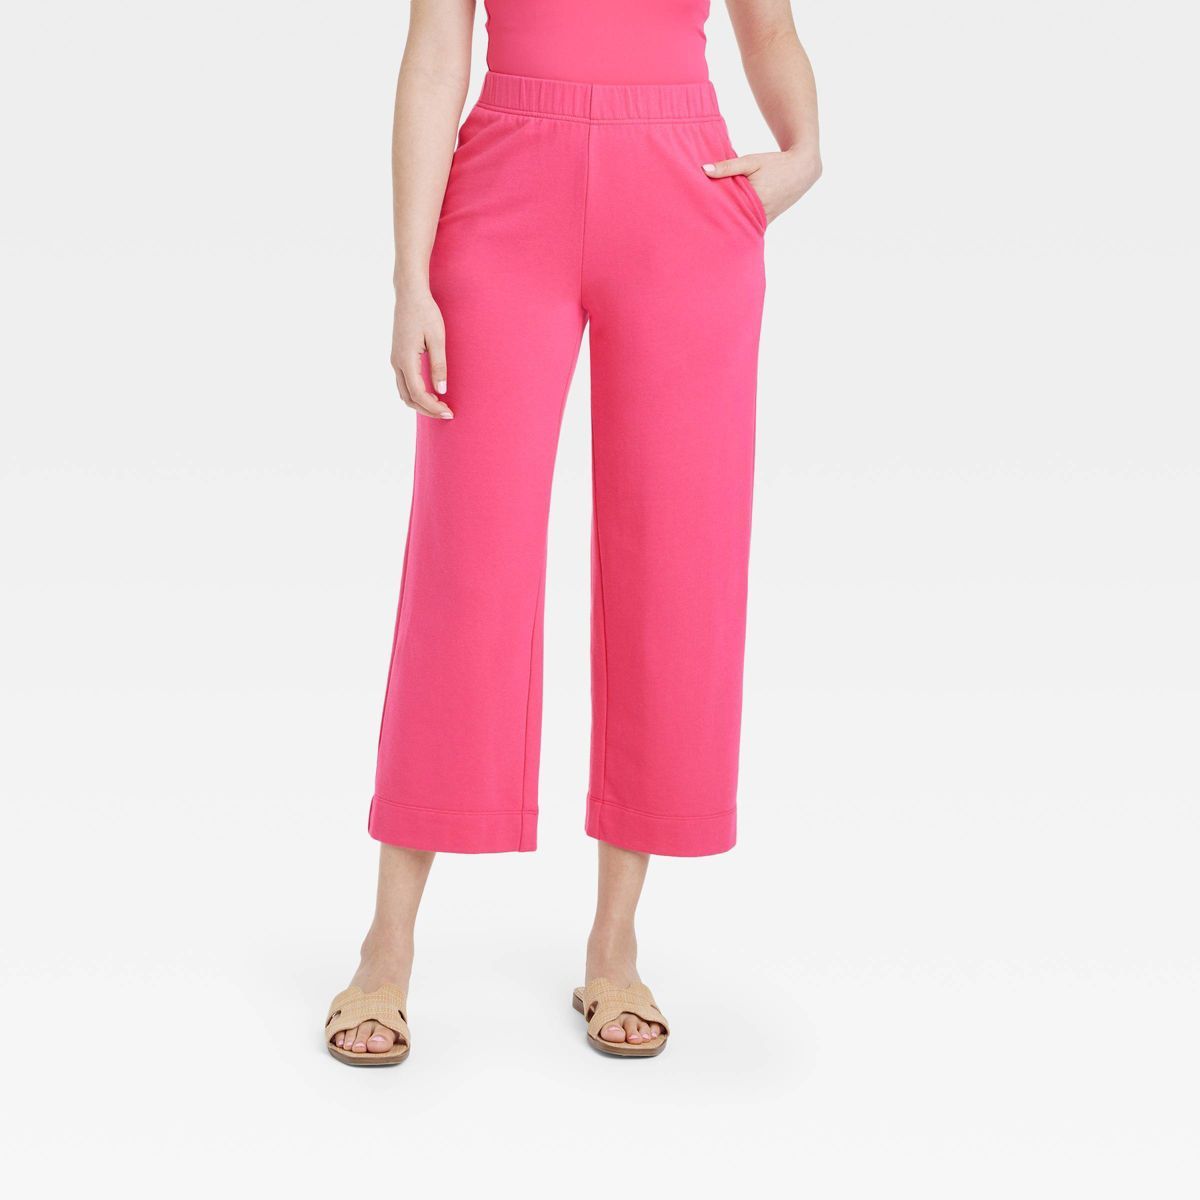 Women's High-Rise Cropped Sweatpants - A New Day™ Pink M | Target